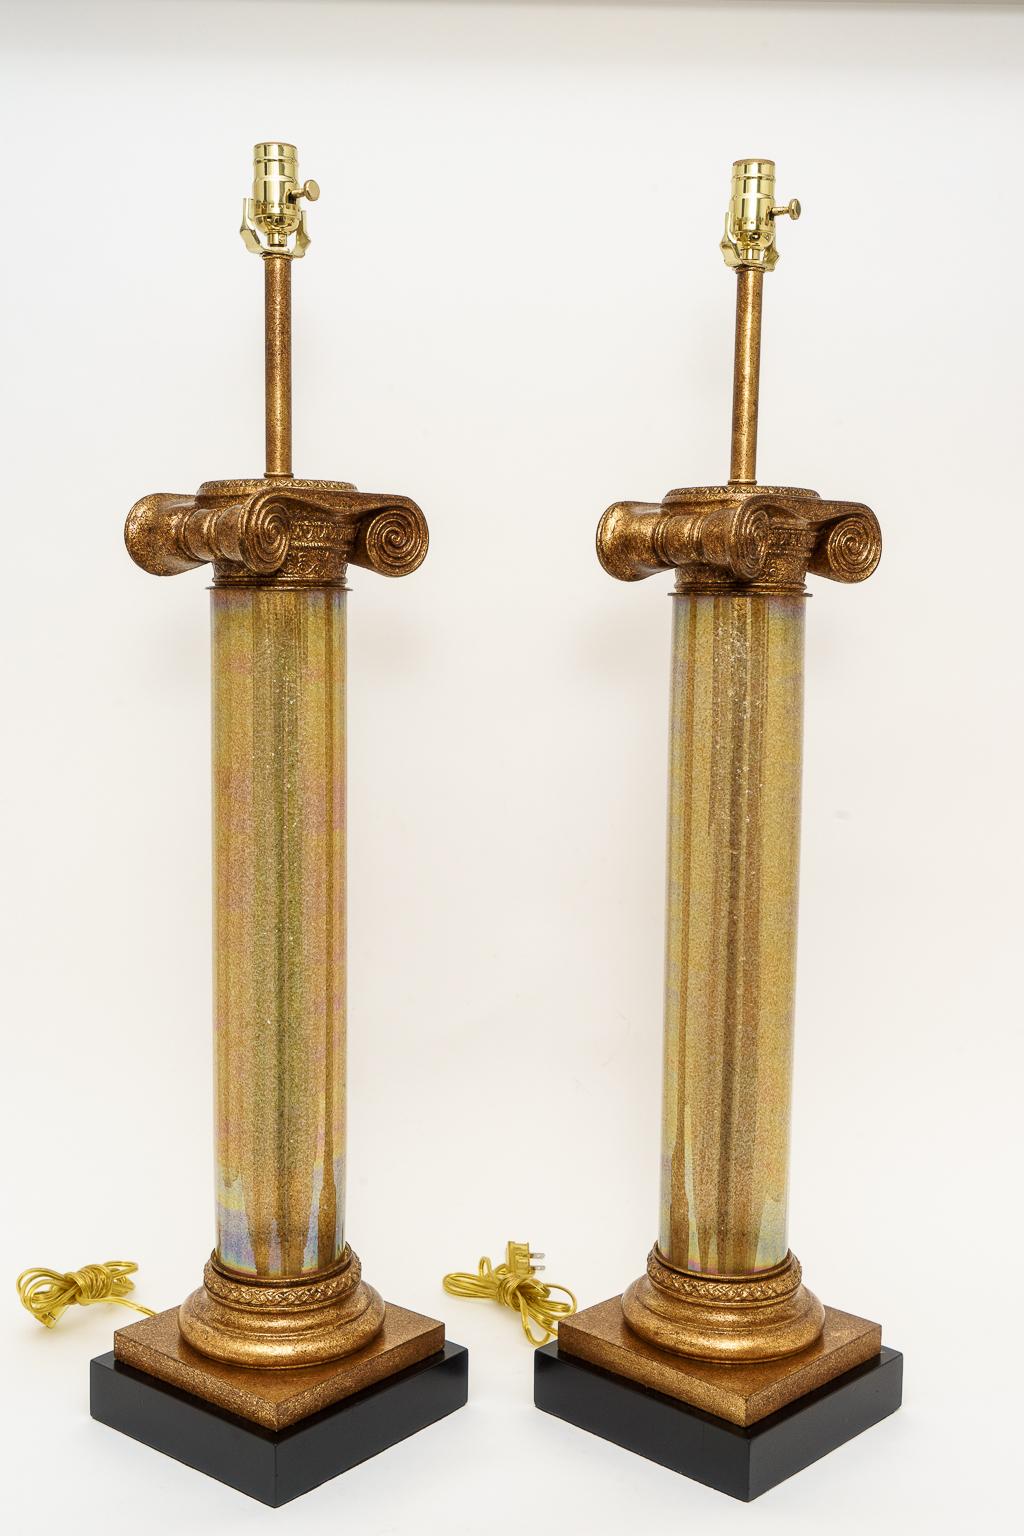 Large scale Murano neoclassical Hollywood Regency golden finish tall column lamps - a pair - from a palm beach estate.